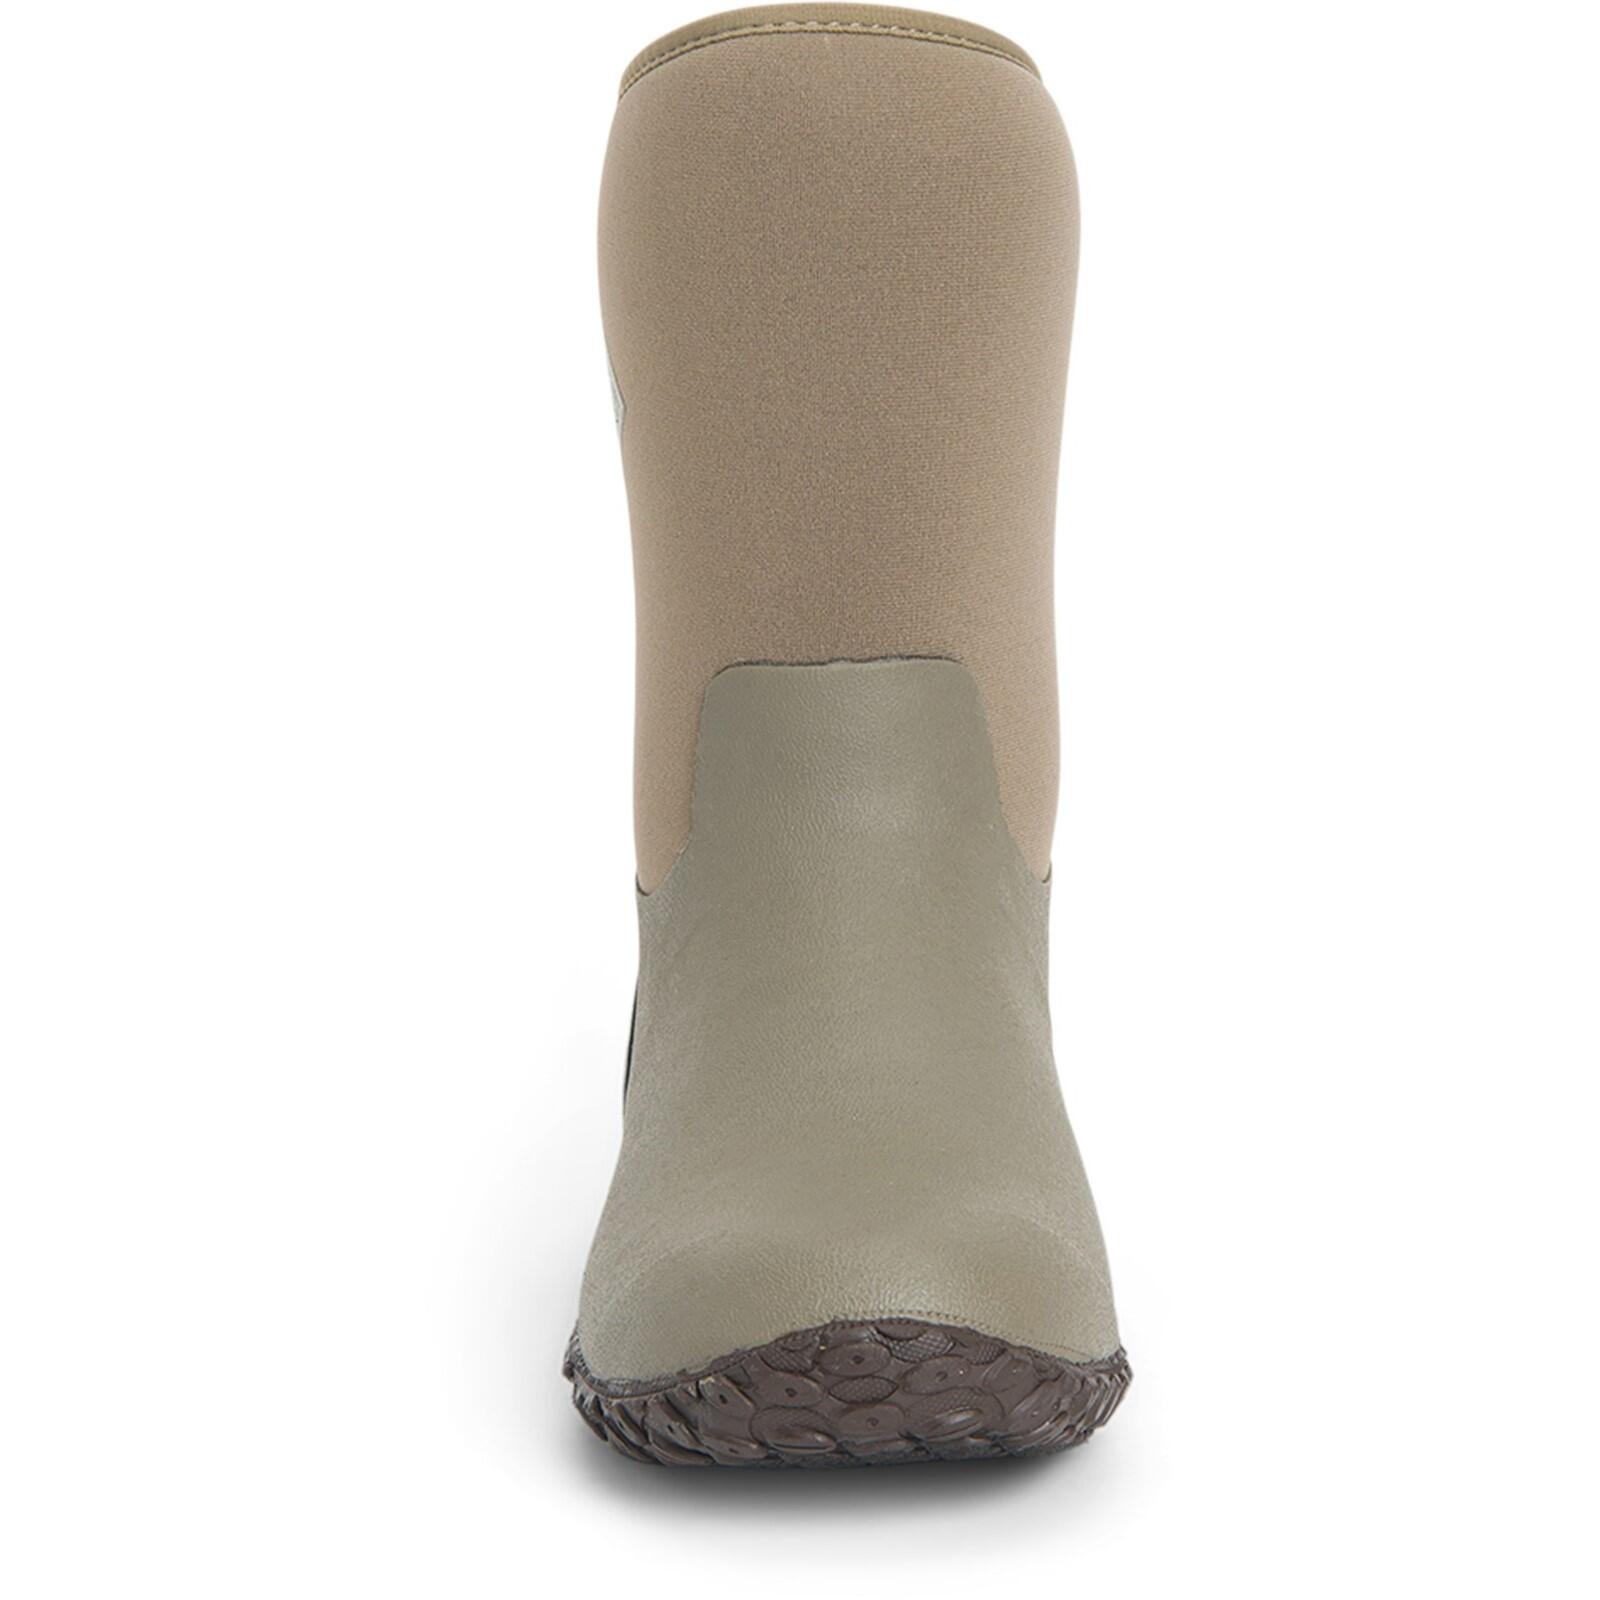 Muckster II Mid Textile/Weather Wellingtons BROWN 4/5